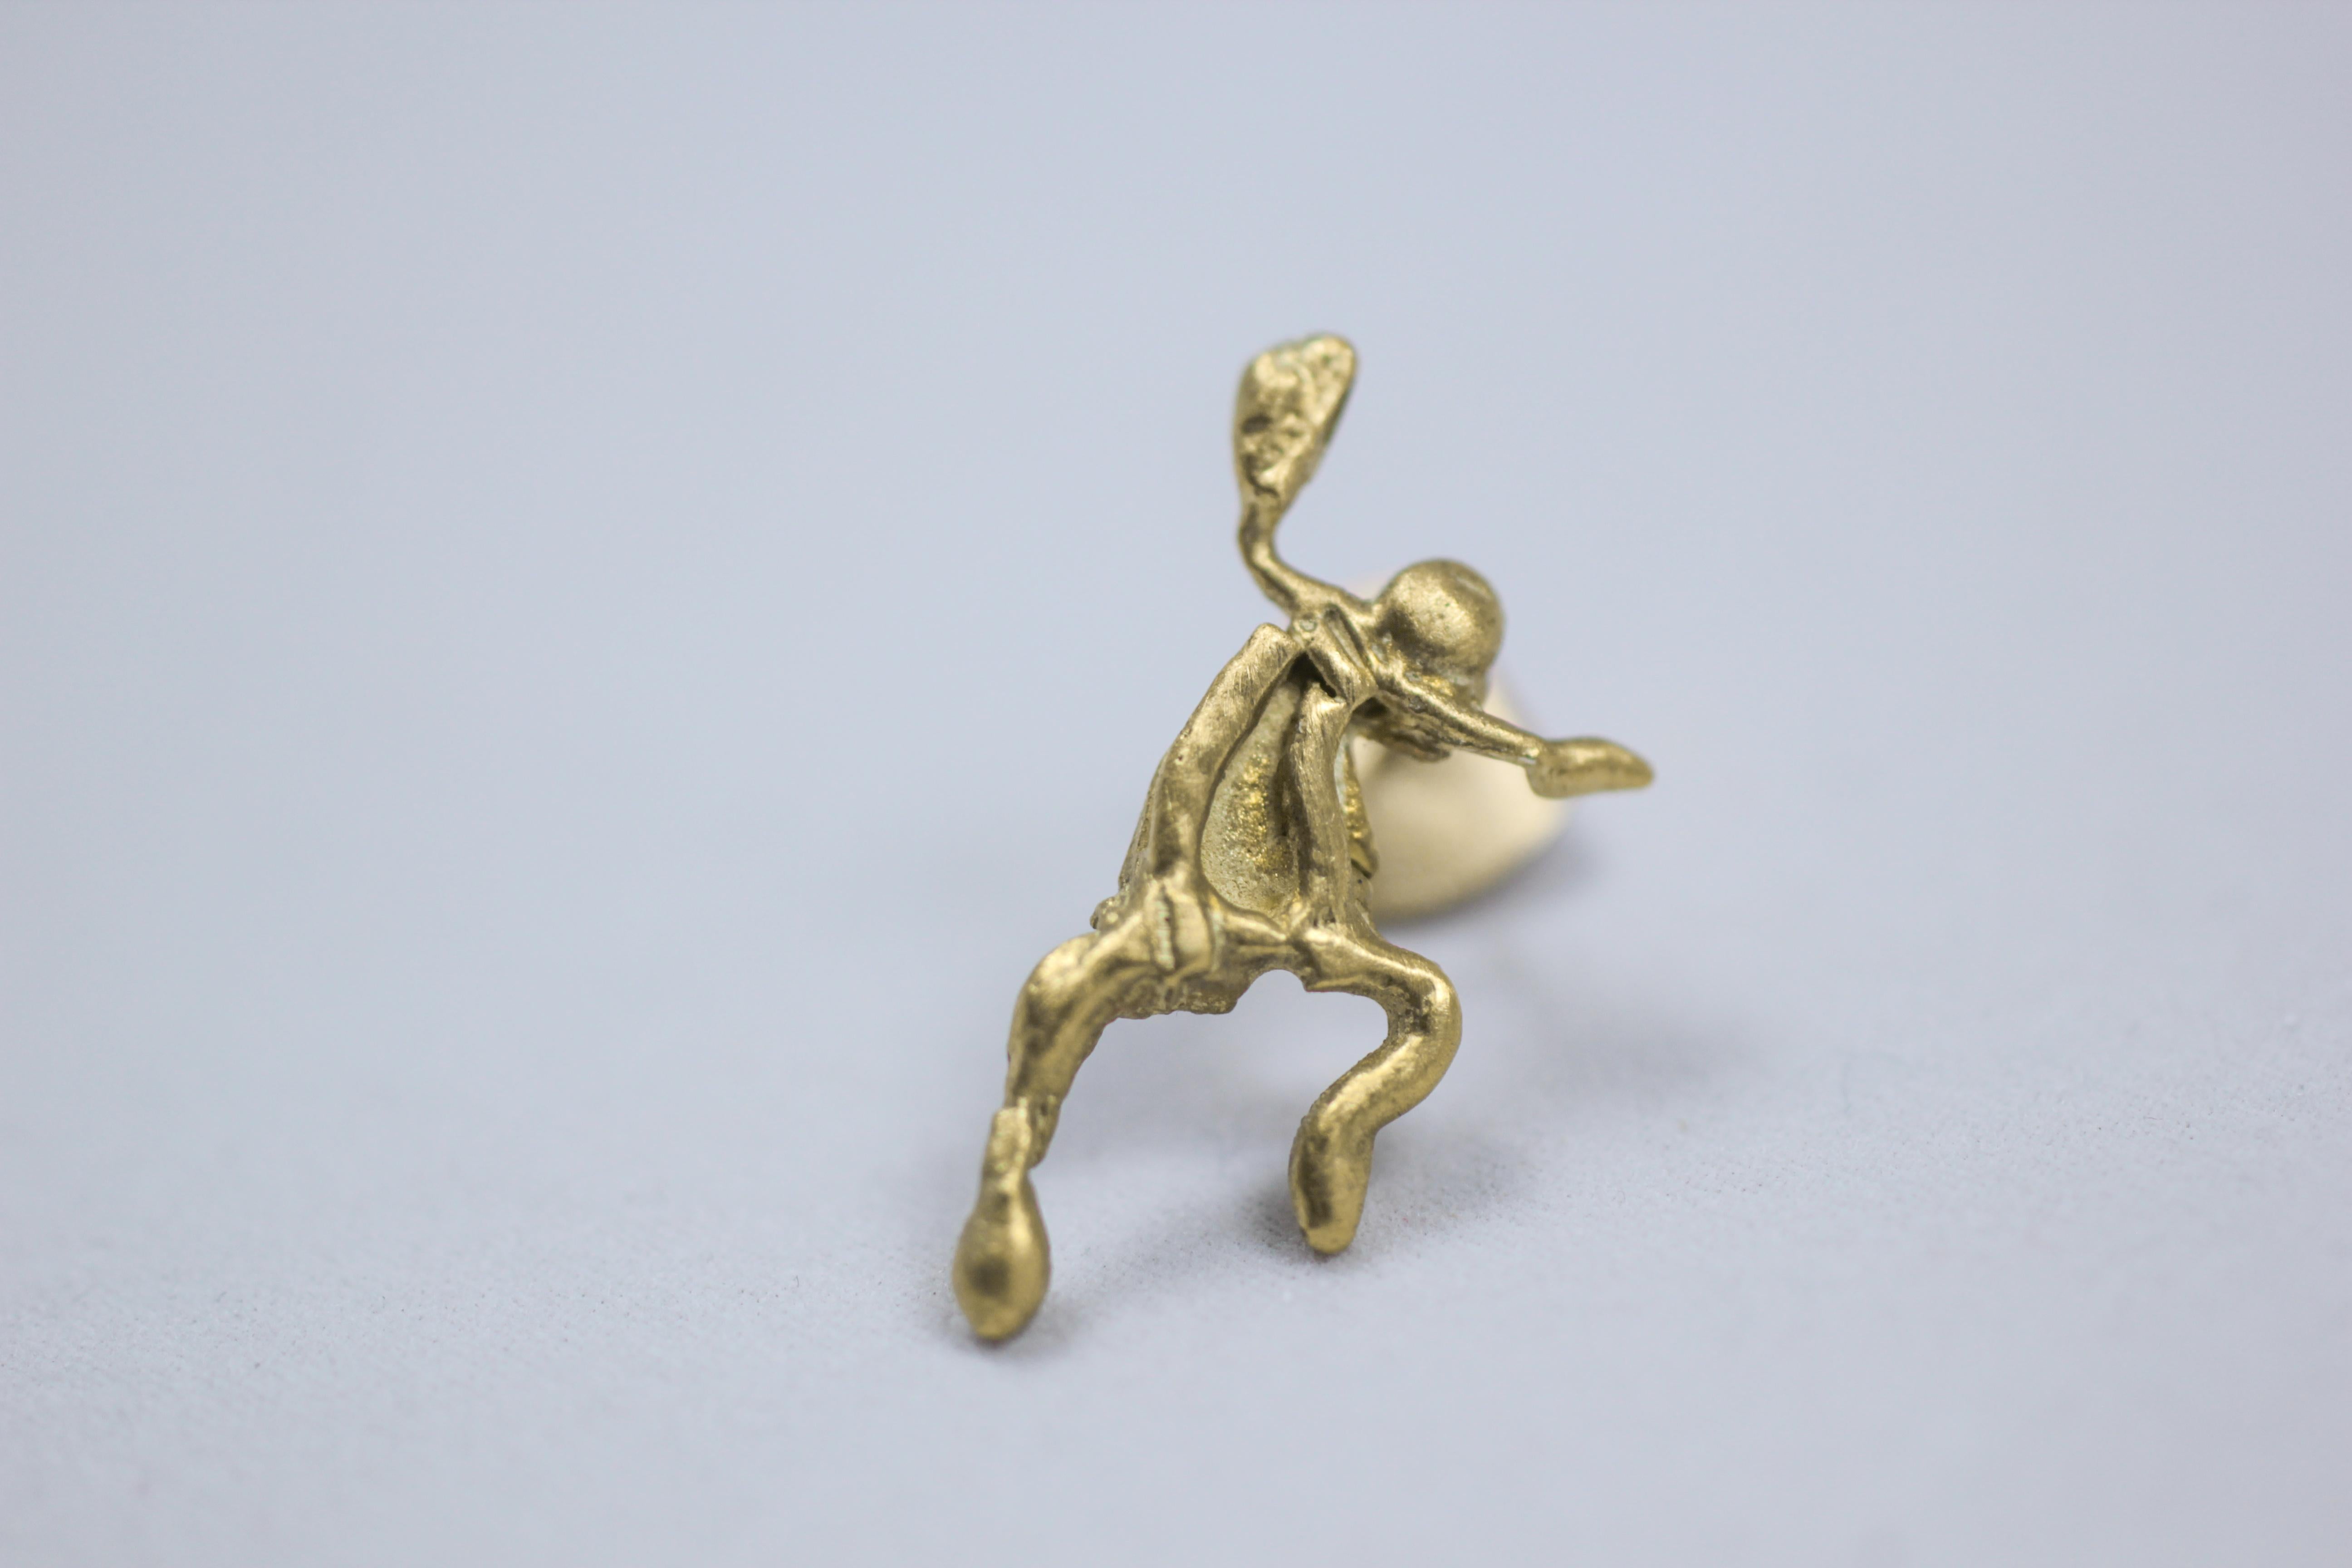 DANCE. Whimsical, asymmetric impressionist style figurine, minimalist single stud earring in 18k Gold. Show your sense of humor with this comfortable sculpture earring while making a stylish statement. Unisex.

Process: These earrings are first hand